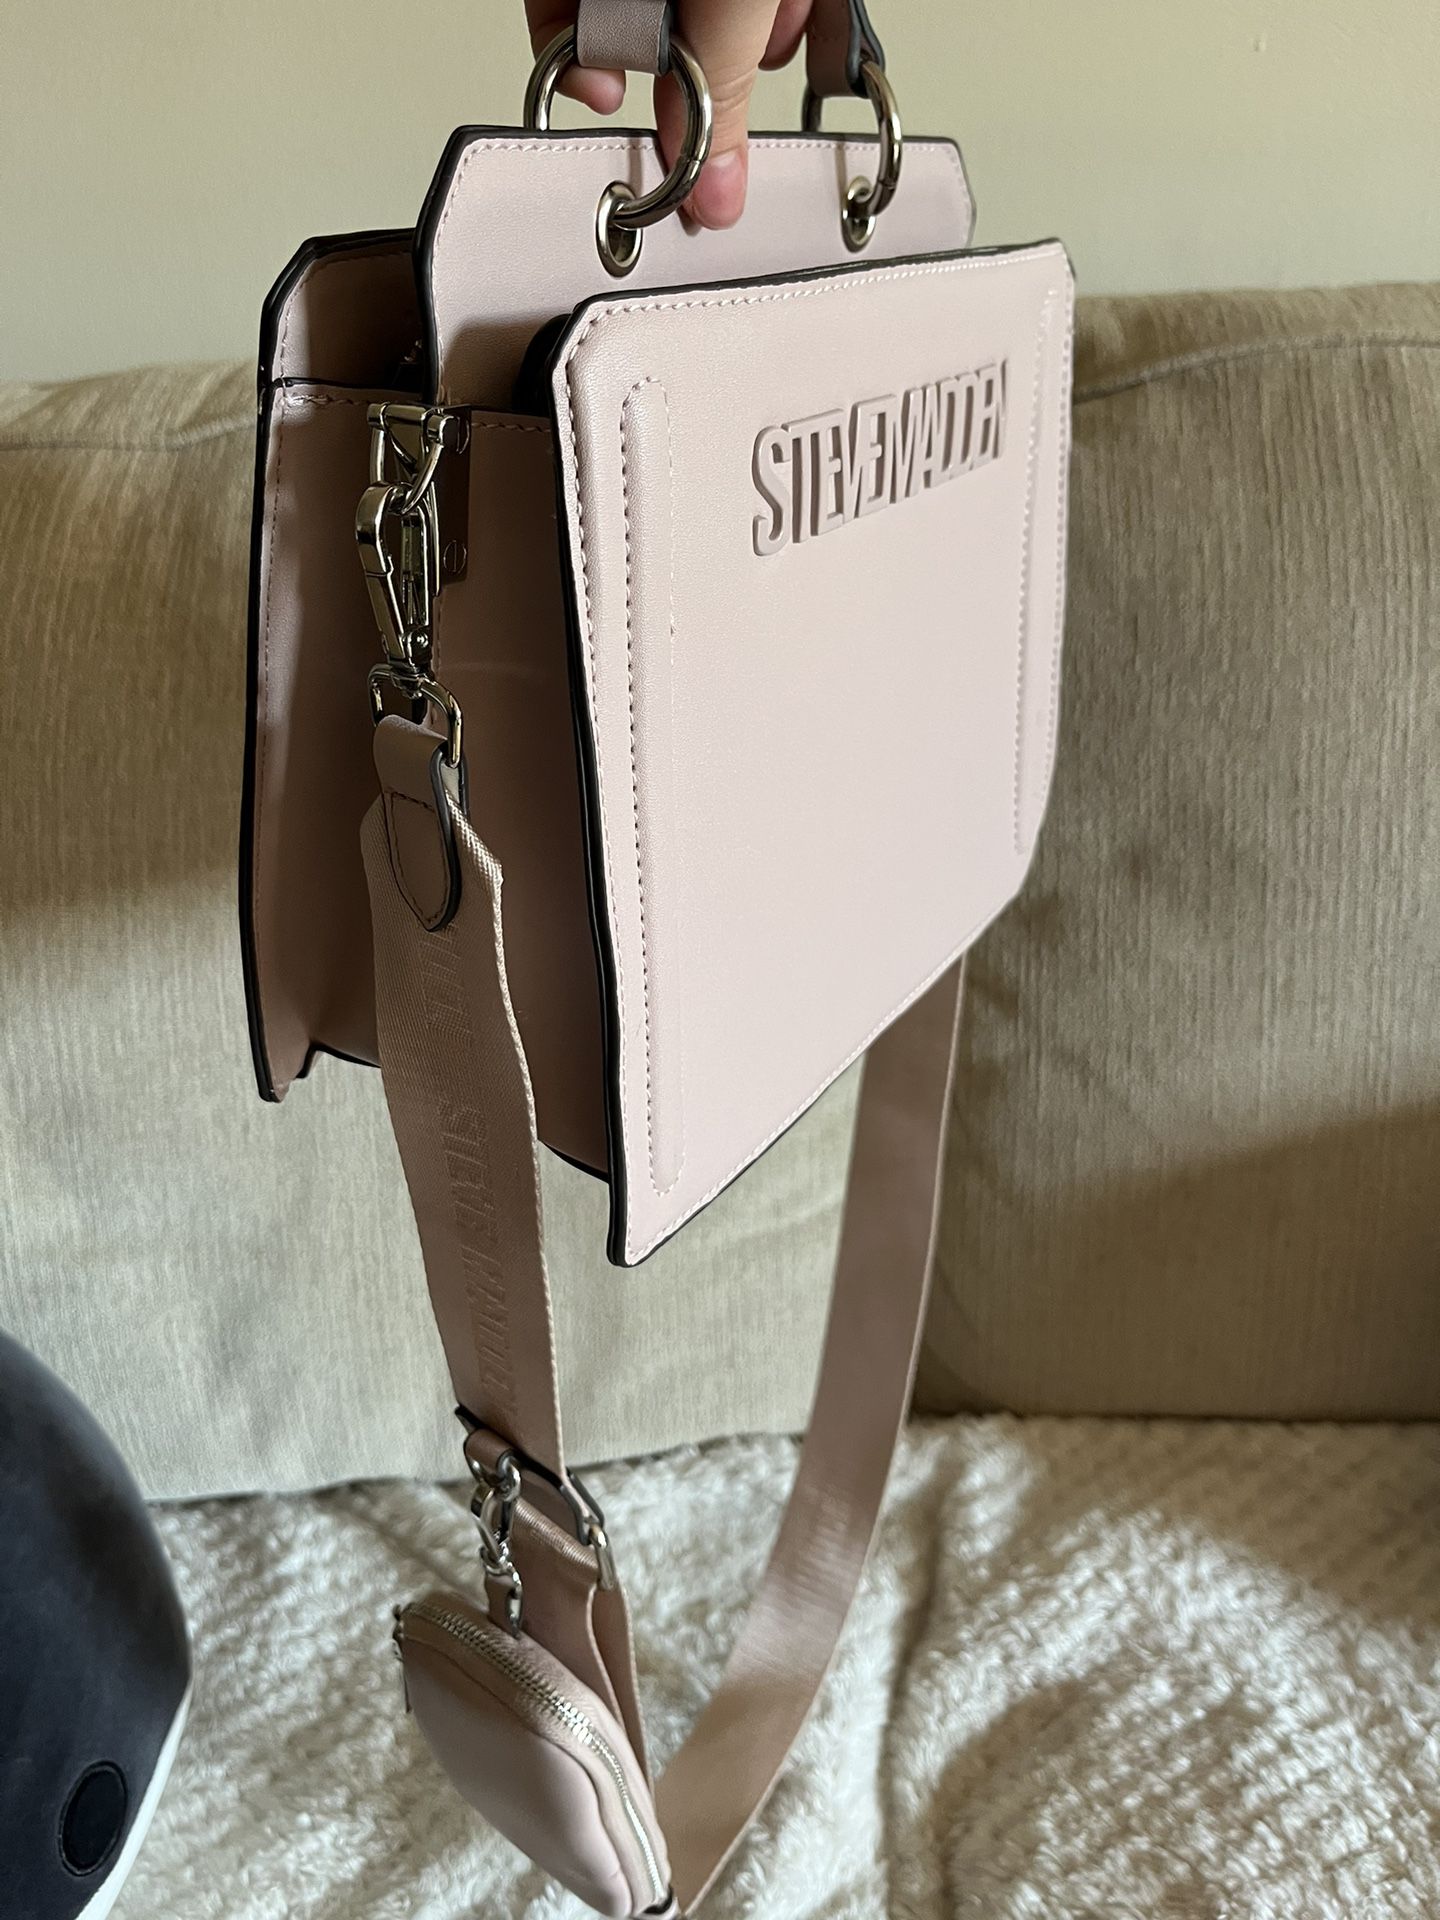 Steve Madden Bag for Sale in Chicago, IL - OfferUp